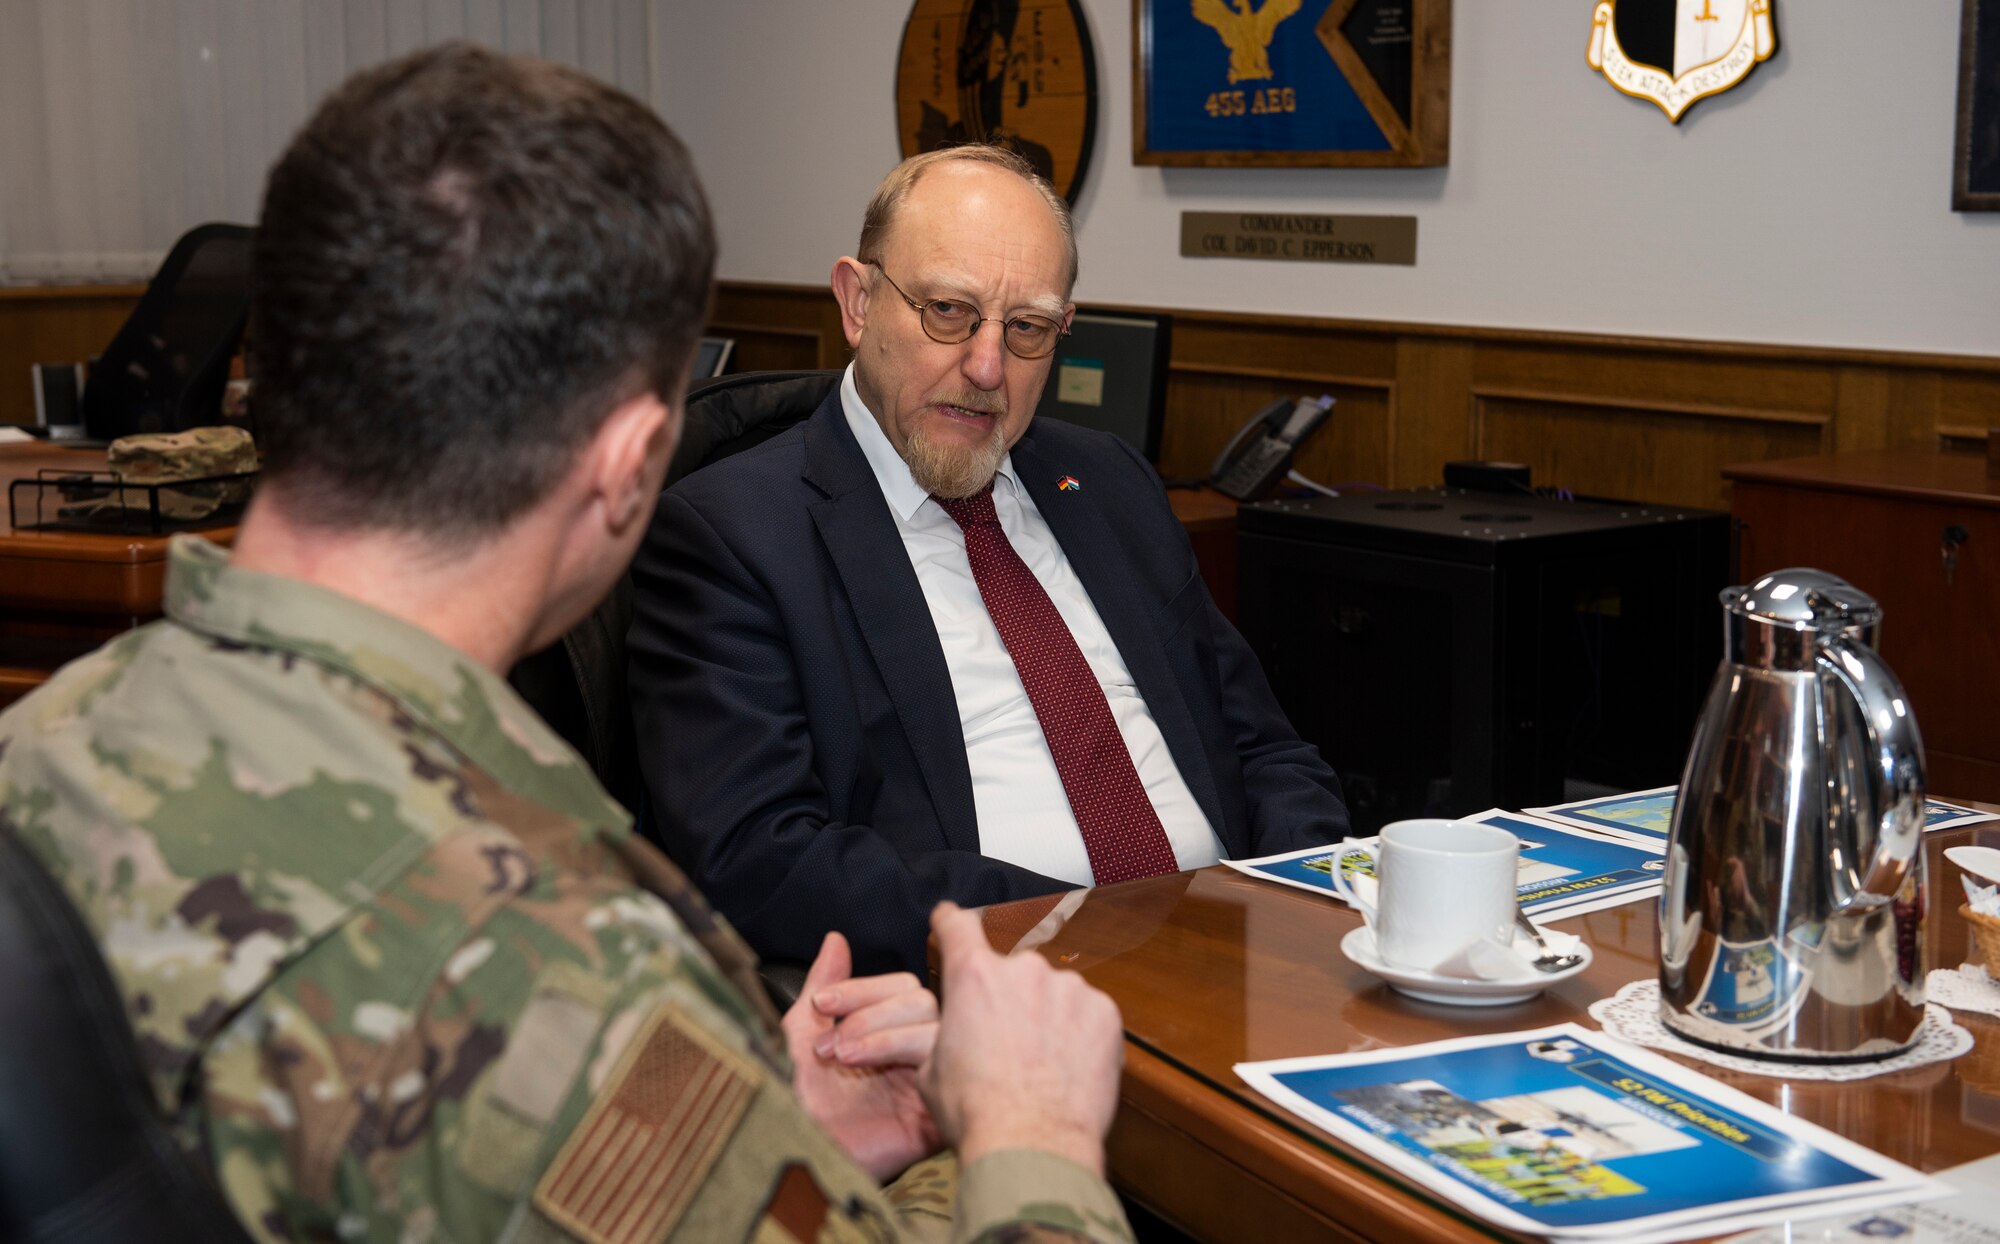 Dr. Heinrich Kreft, German ambassador to Luxembourg, center, speaks with U.S. Air Force Col. David Epperson, 52nd Fighter Wing commander, left, at Spangdahlem Air Base, Germany, Jan. 13, 2020. Epperson informed Kreft of Spangdahlem's mission in the Eifel, and spoke about the importance of Airmen and their contributions to the mission. (U.S. Air Force photo by Airman 1st Class Alison Stewart)